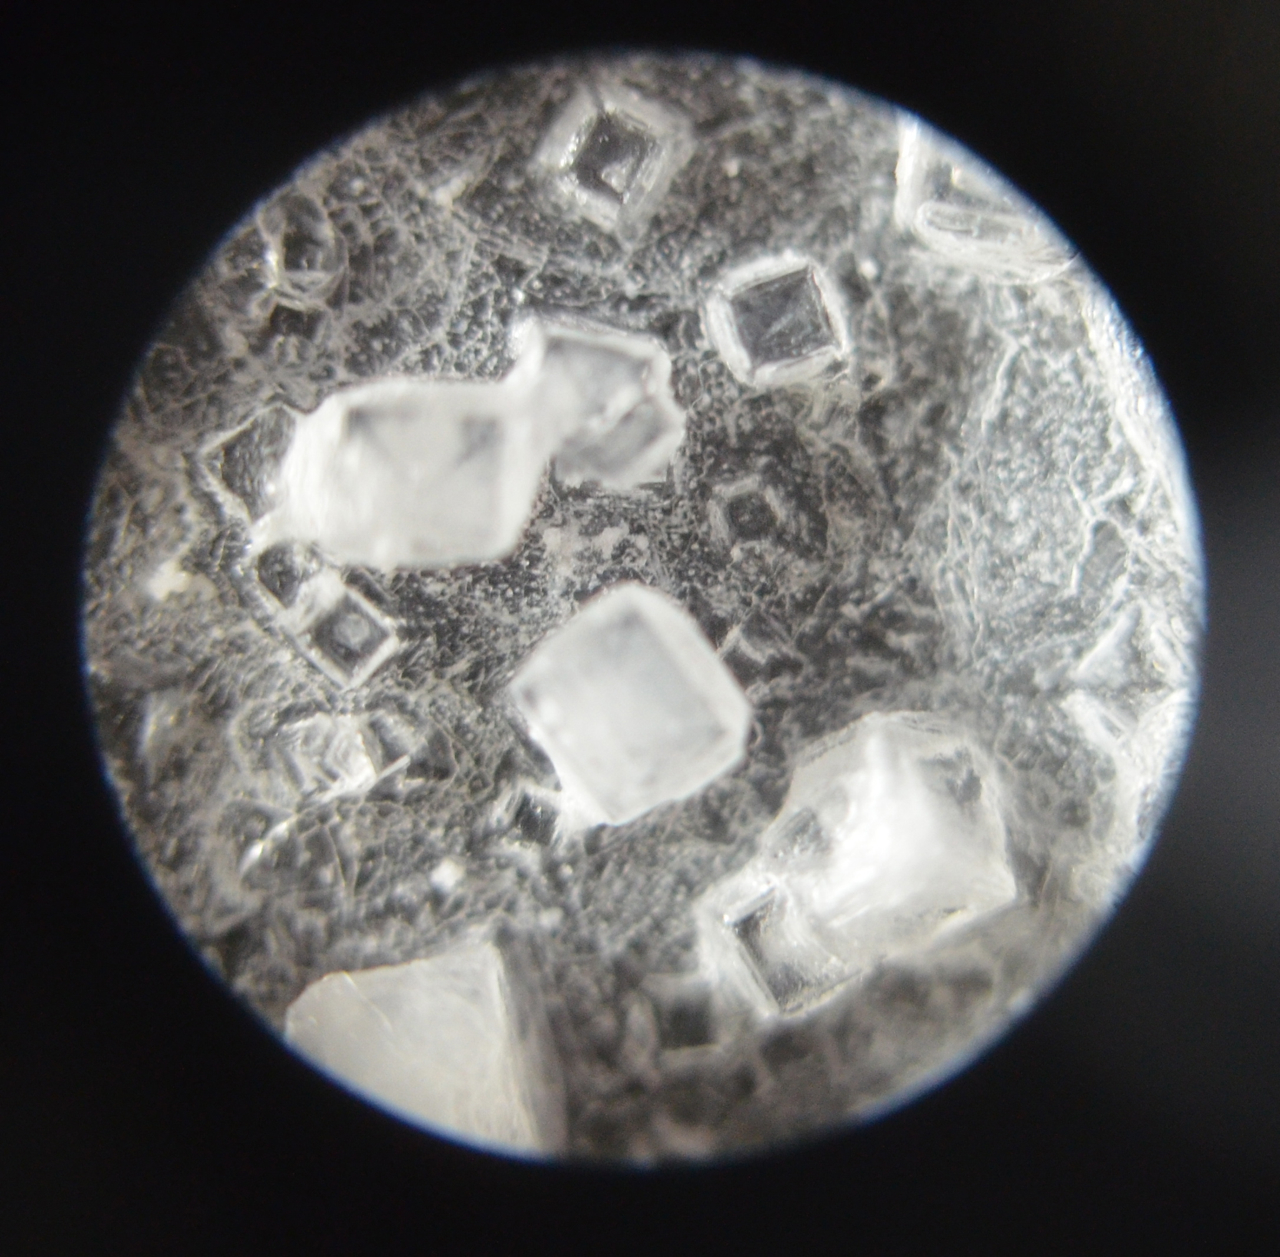 What DID we do all day? : Crystallization